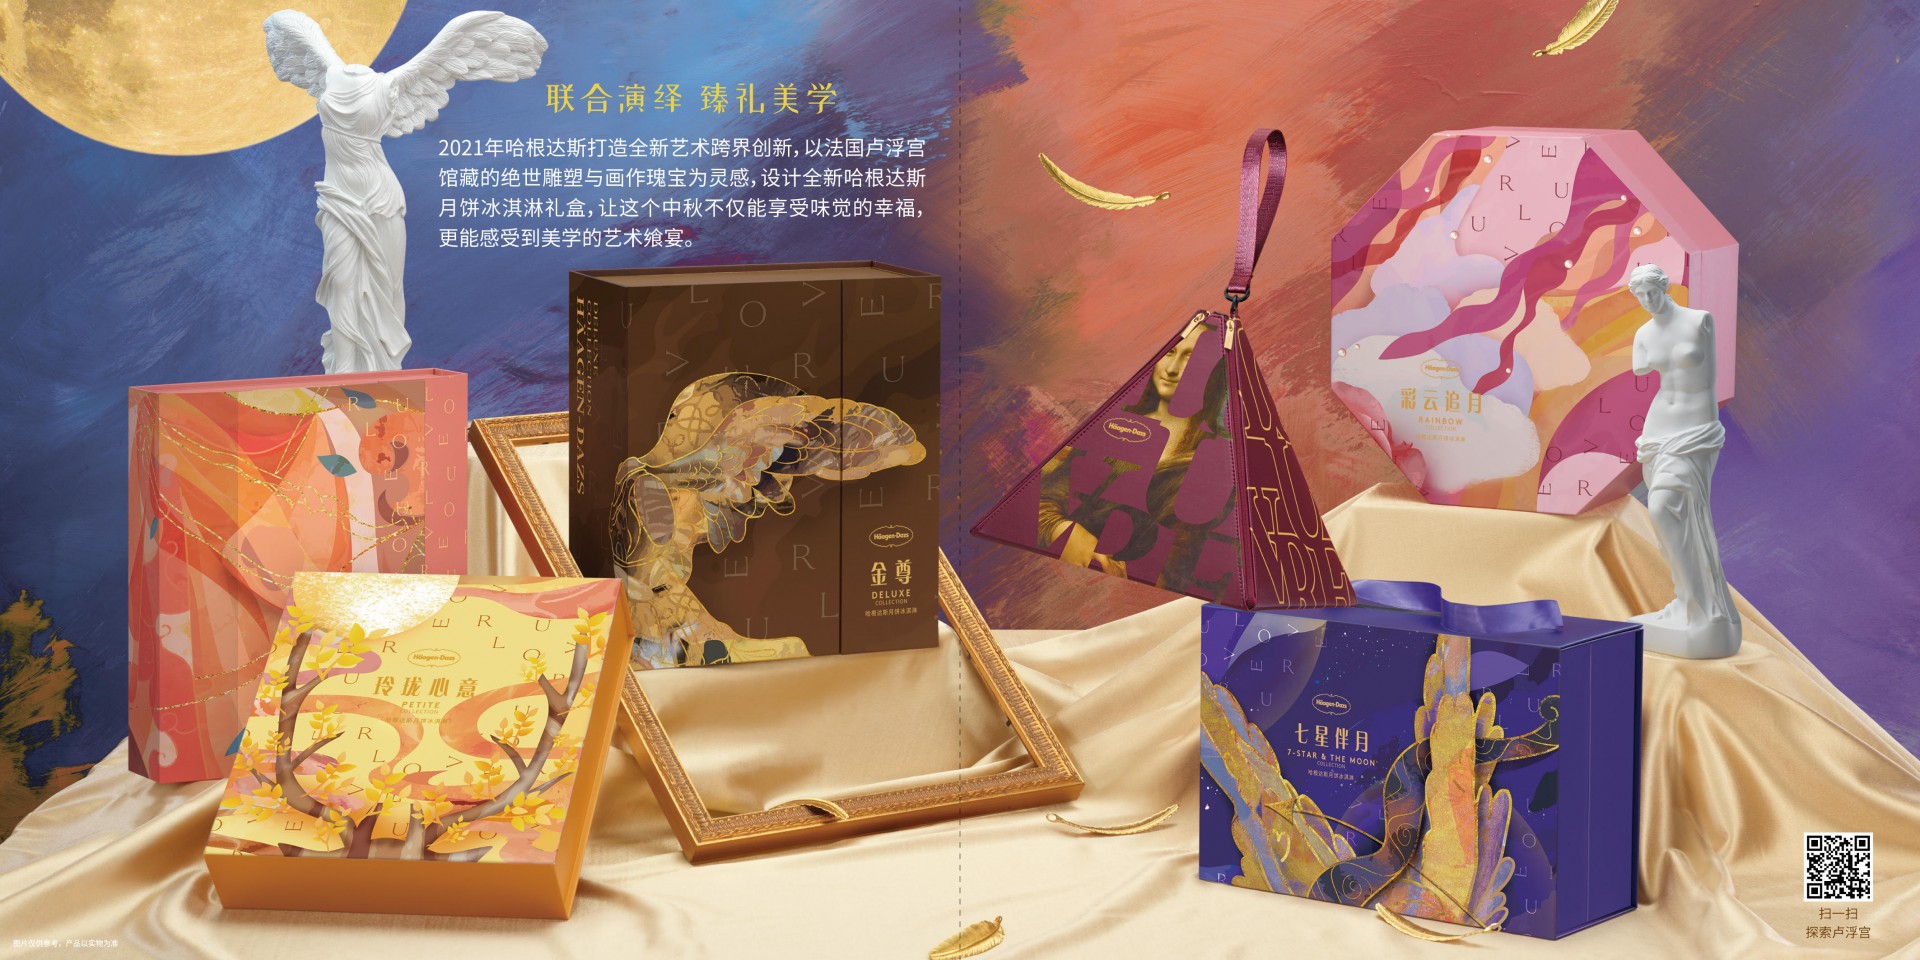 New packaging of the mooncake ice cream